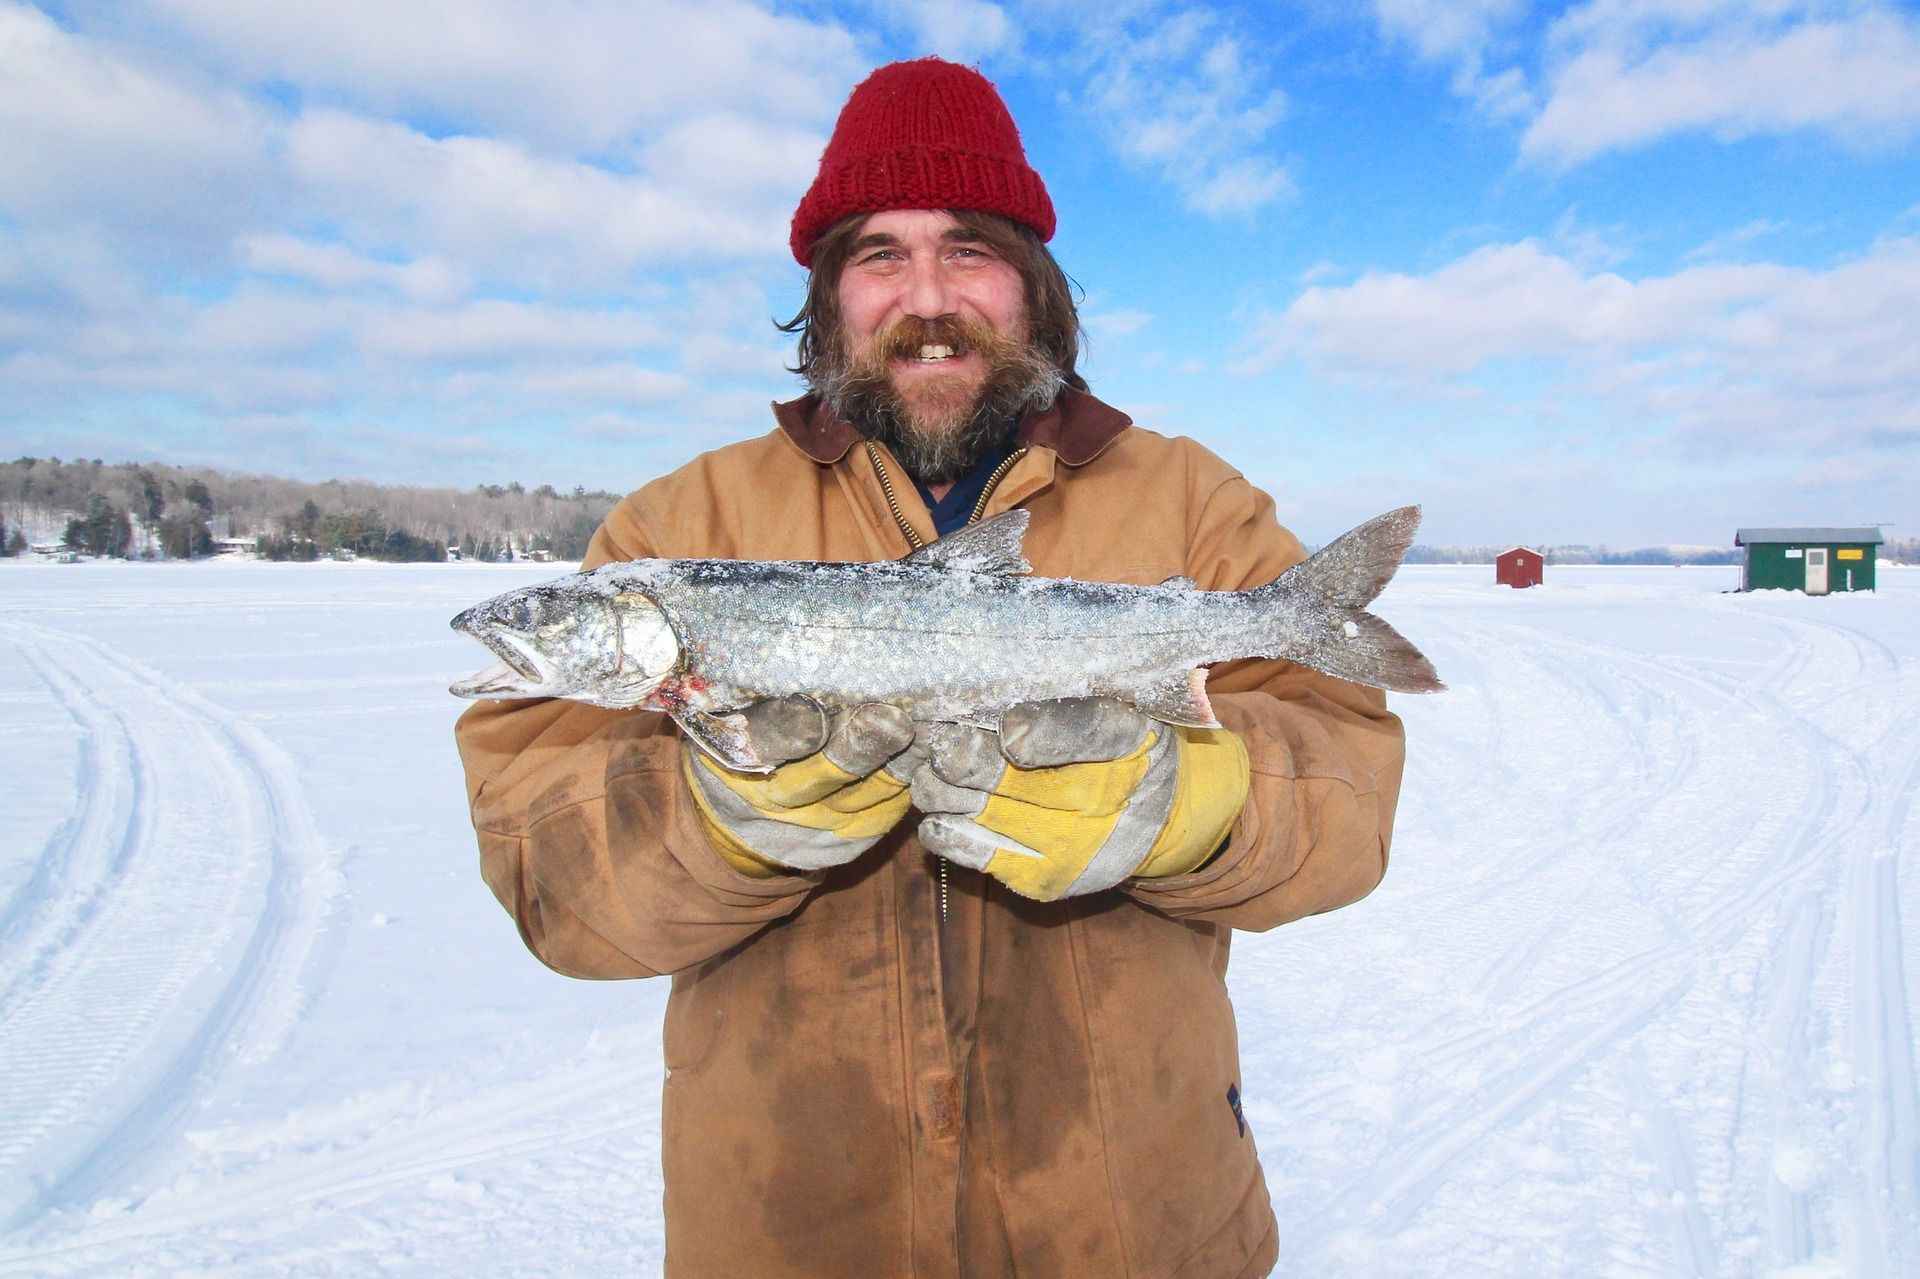 Top 6 States for Ice Fishing